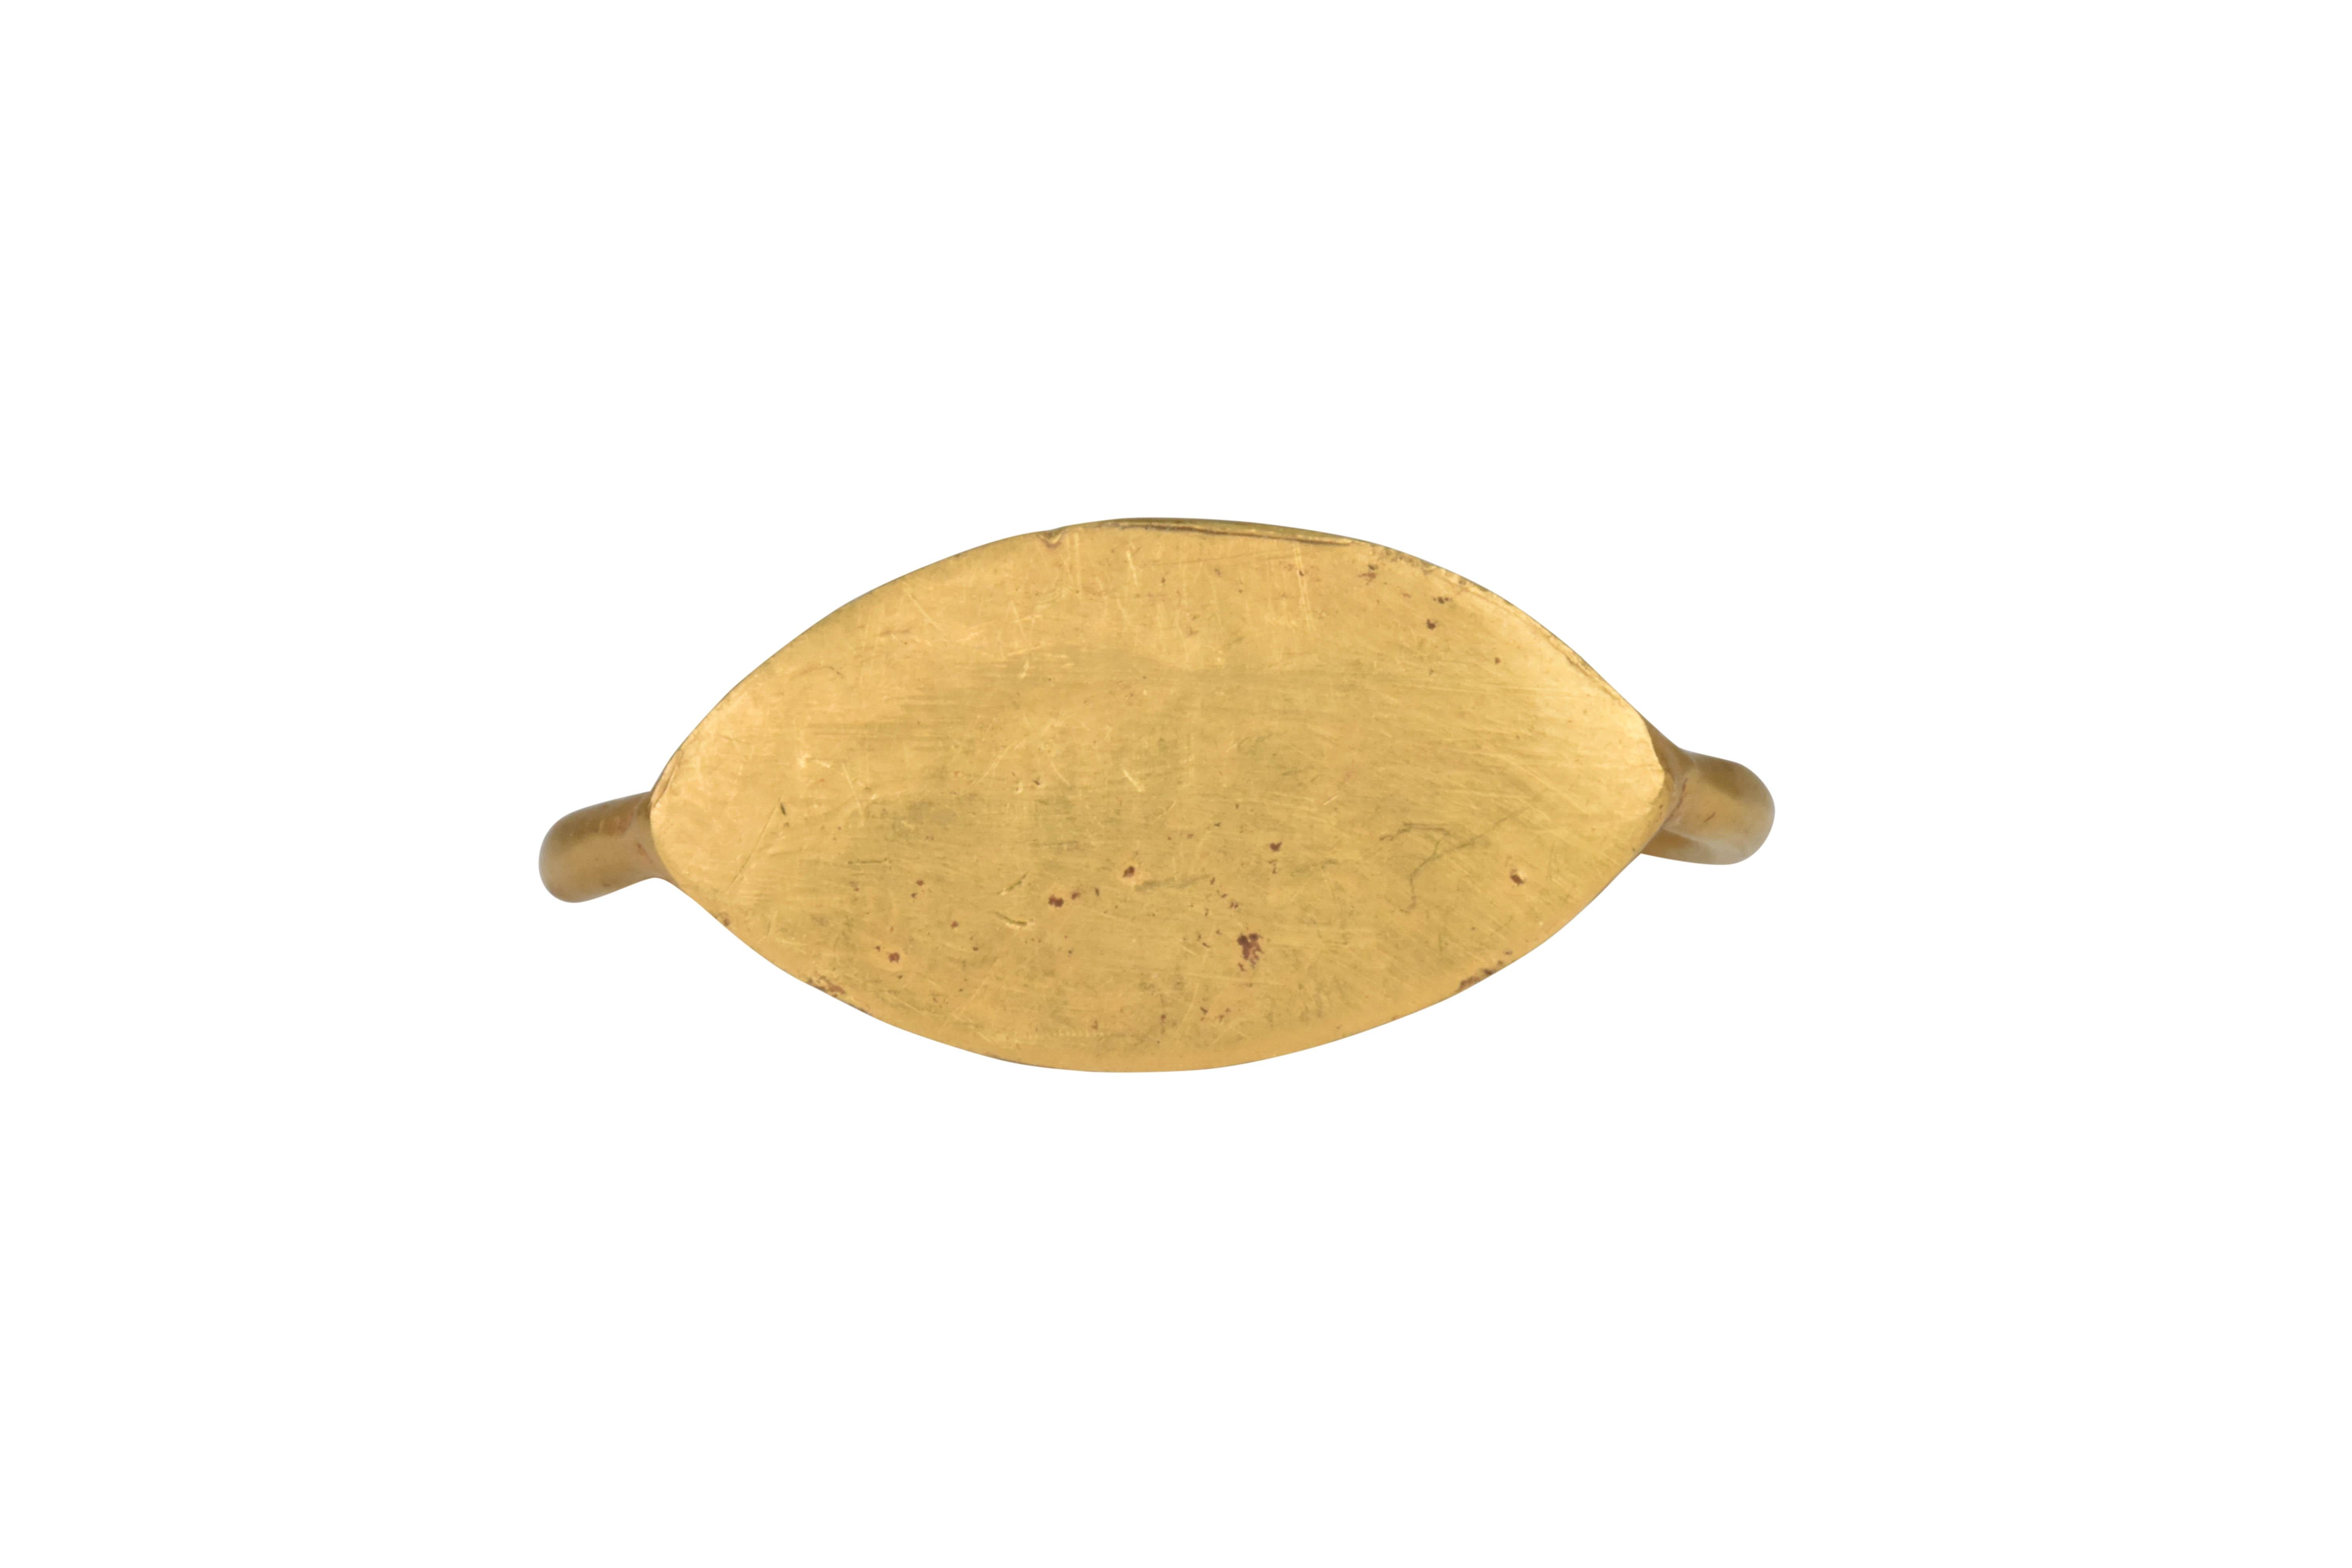 Ancient Celtic Iron Age Gold Ring

Ca. 100 BC, An Ancient Celtic, Iron Age gold ring composed of a delicate D-shaped, round-section hoop supporting an elliptical, smooth bezel.

Size: D: 17.35mm / US: 7 / UK: O; 3.82g

Provenance: From a Central